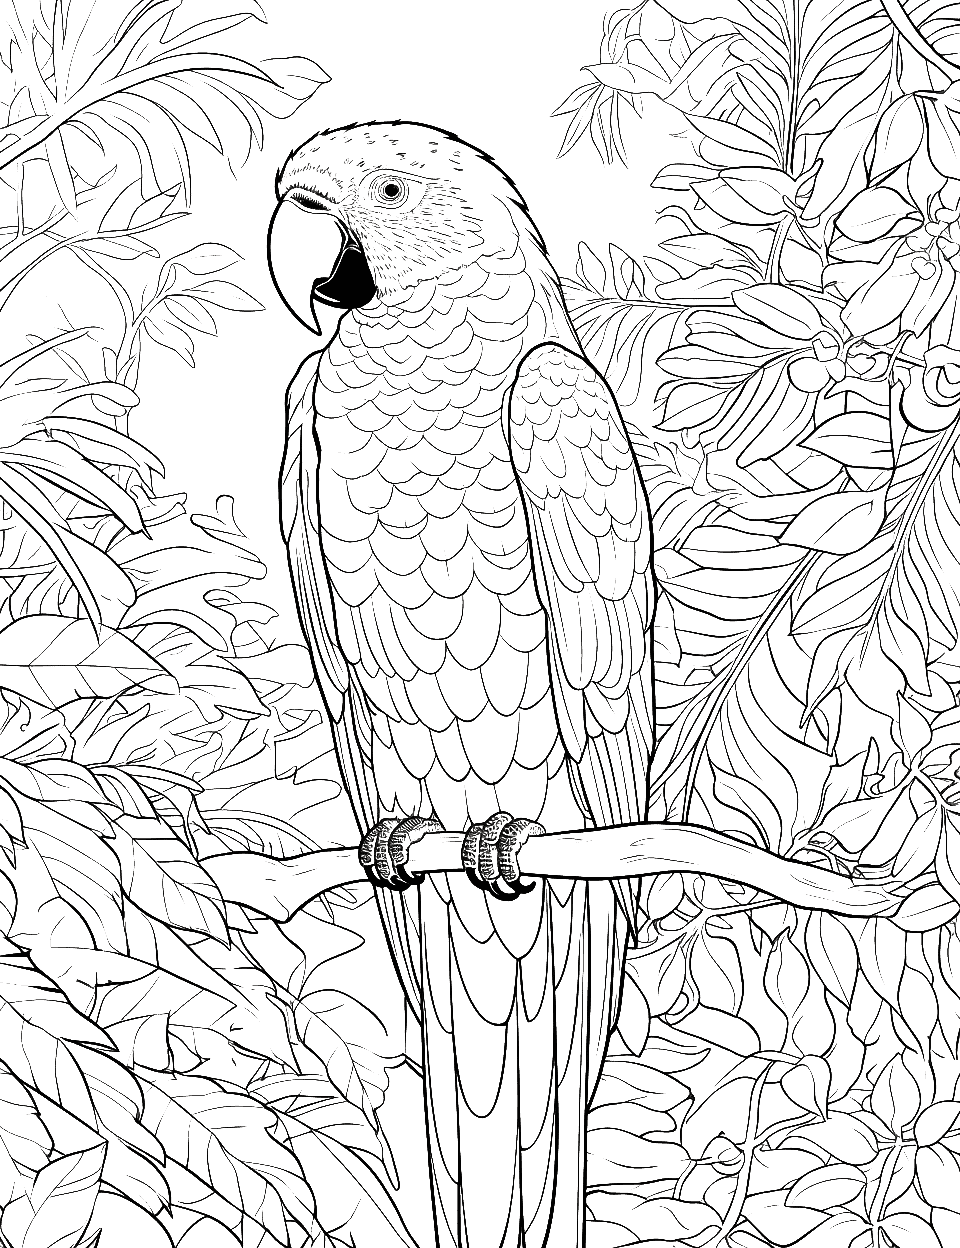 Parrot's Jungle  Adult Coloring Page - A parrot sitting amidst lush jungle foliage.